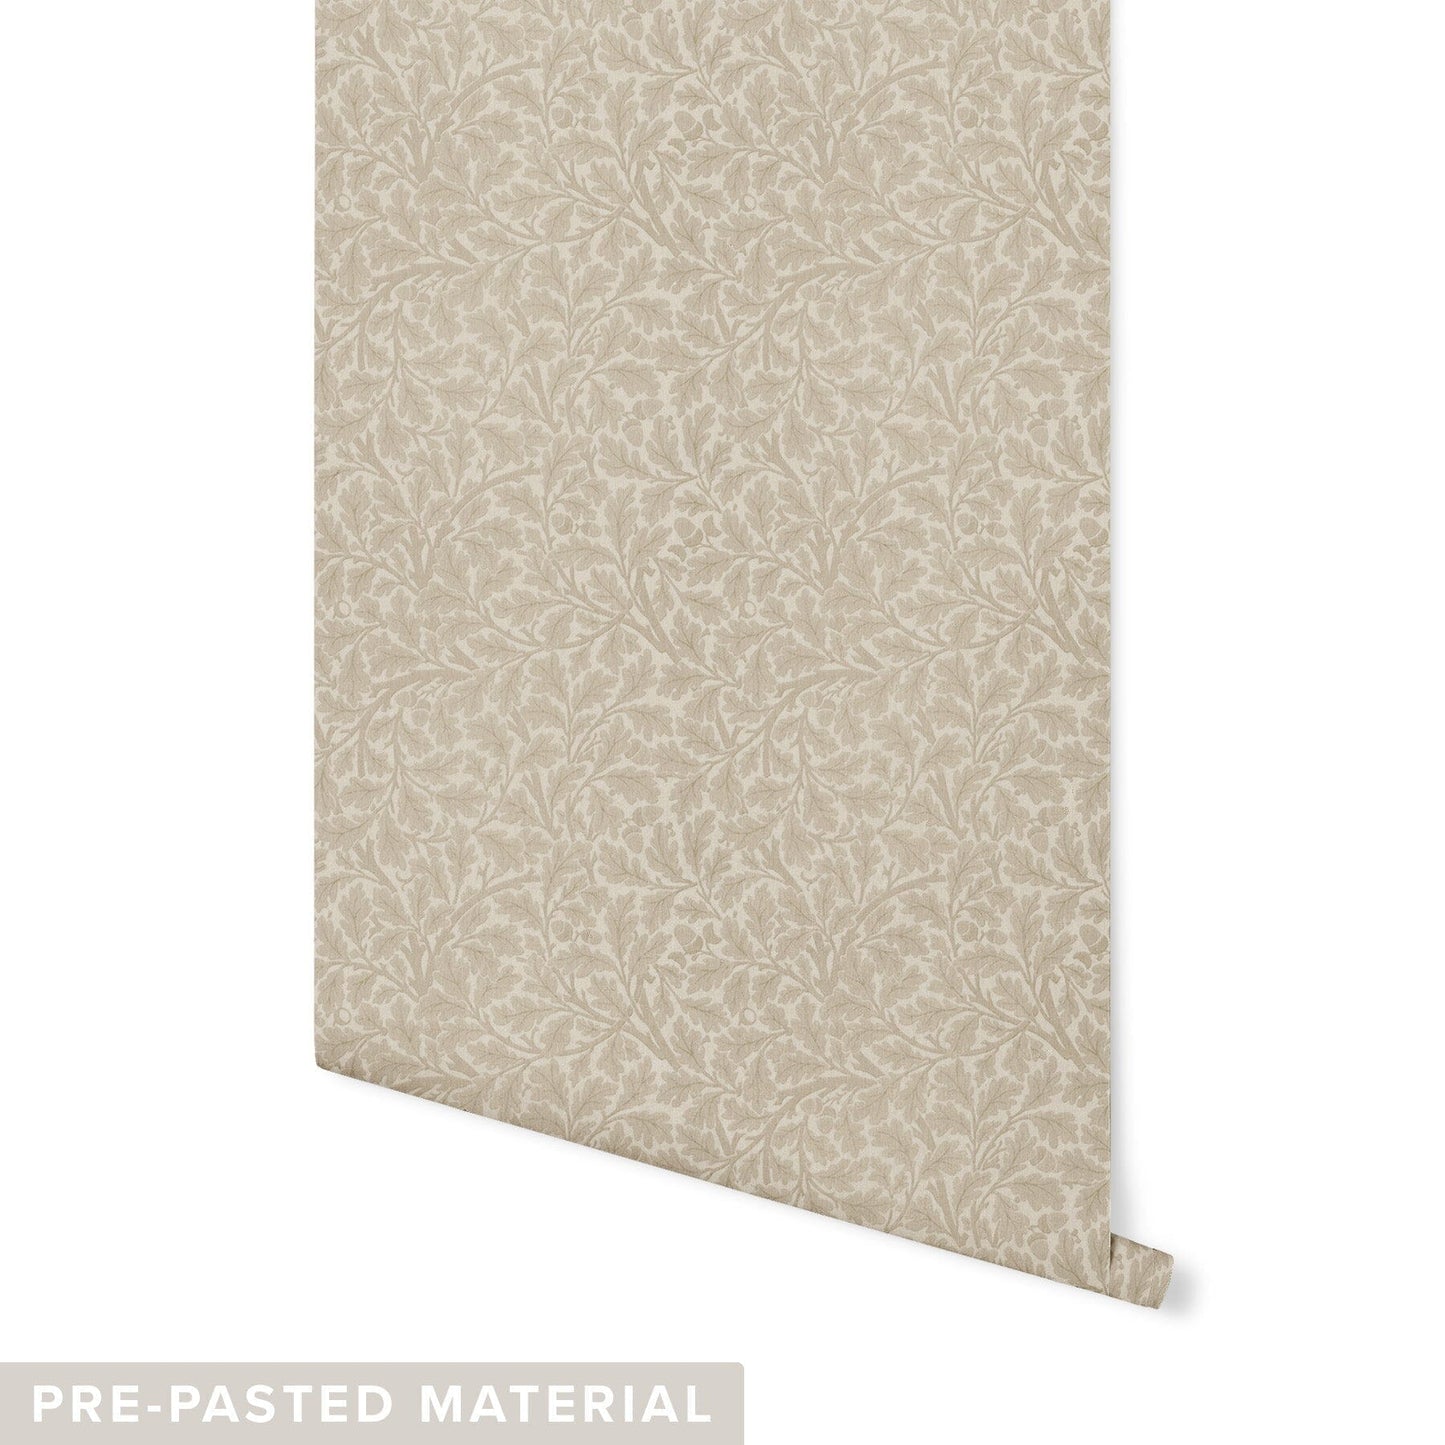 Oak Tree Wallpaper Wallpaper Mia Parres Pre-pasted Maple Leaf Brown DOUBLE ROLL : 46" X 4 FEET